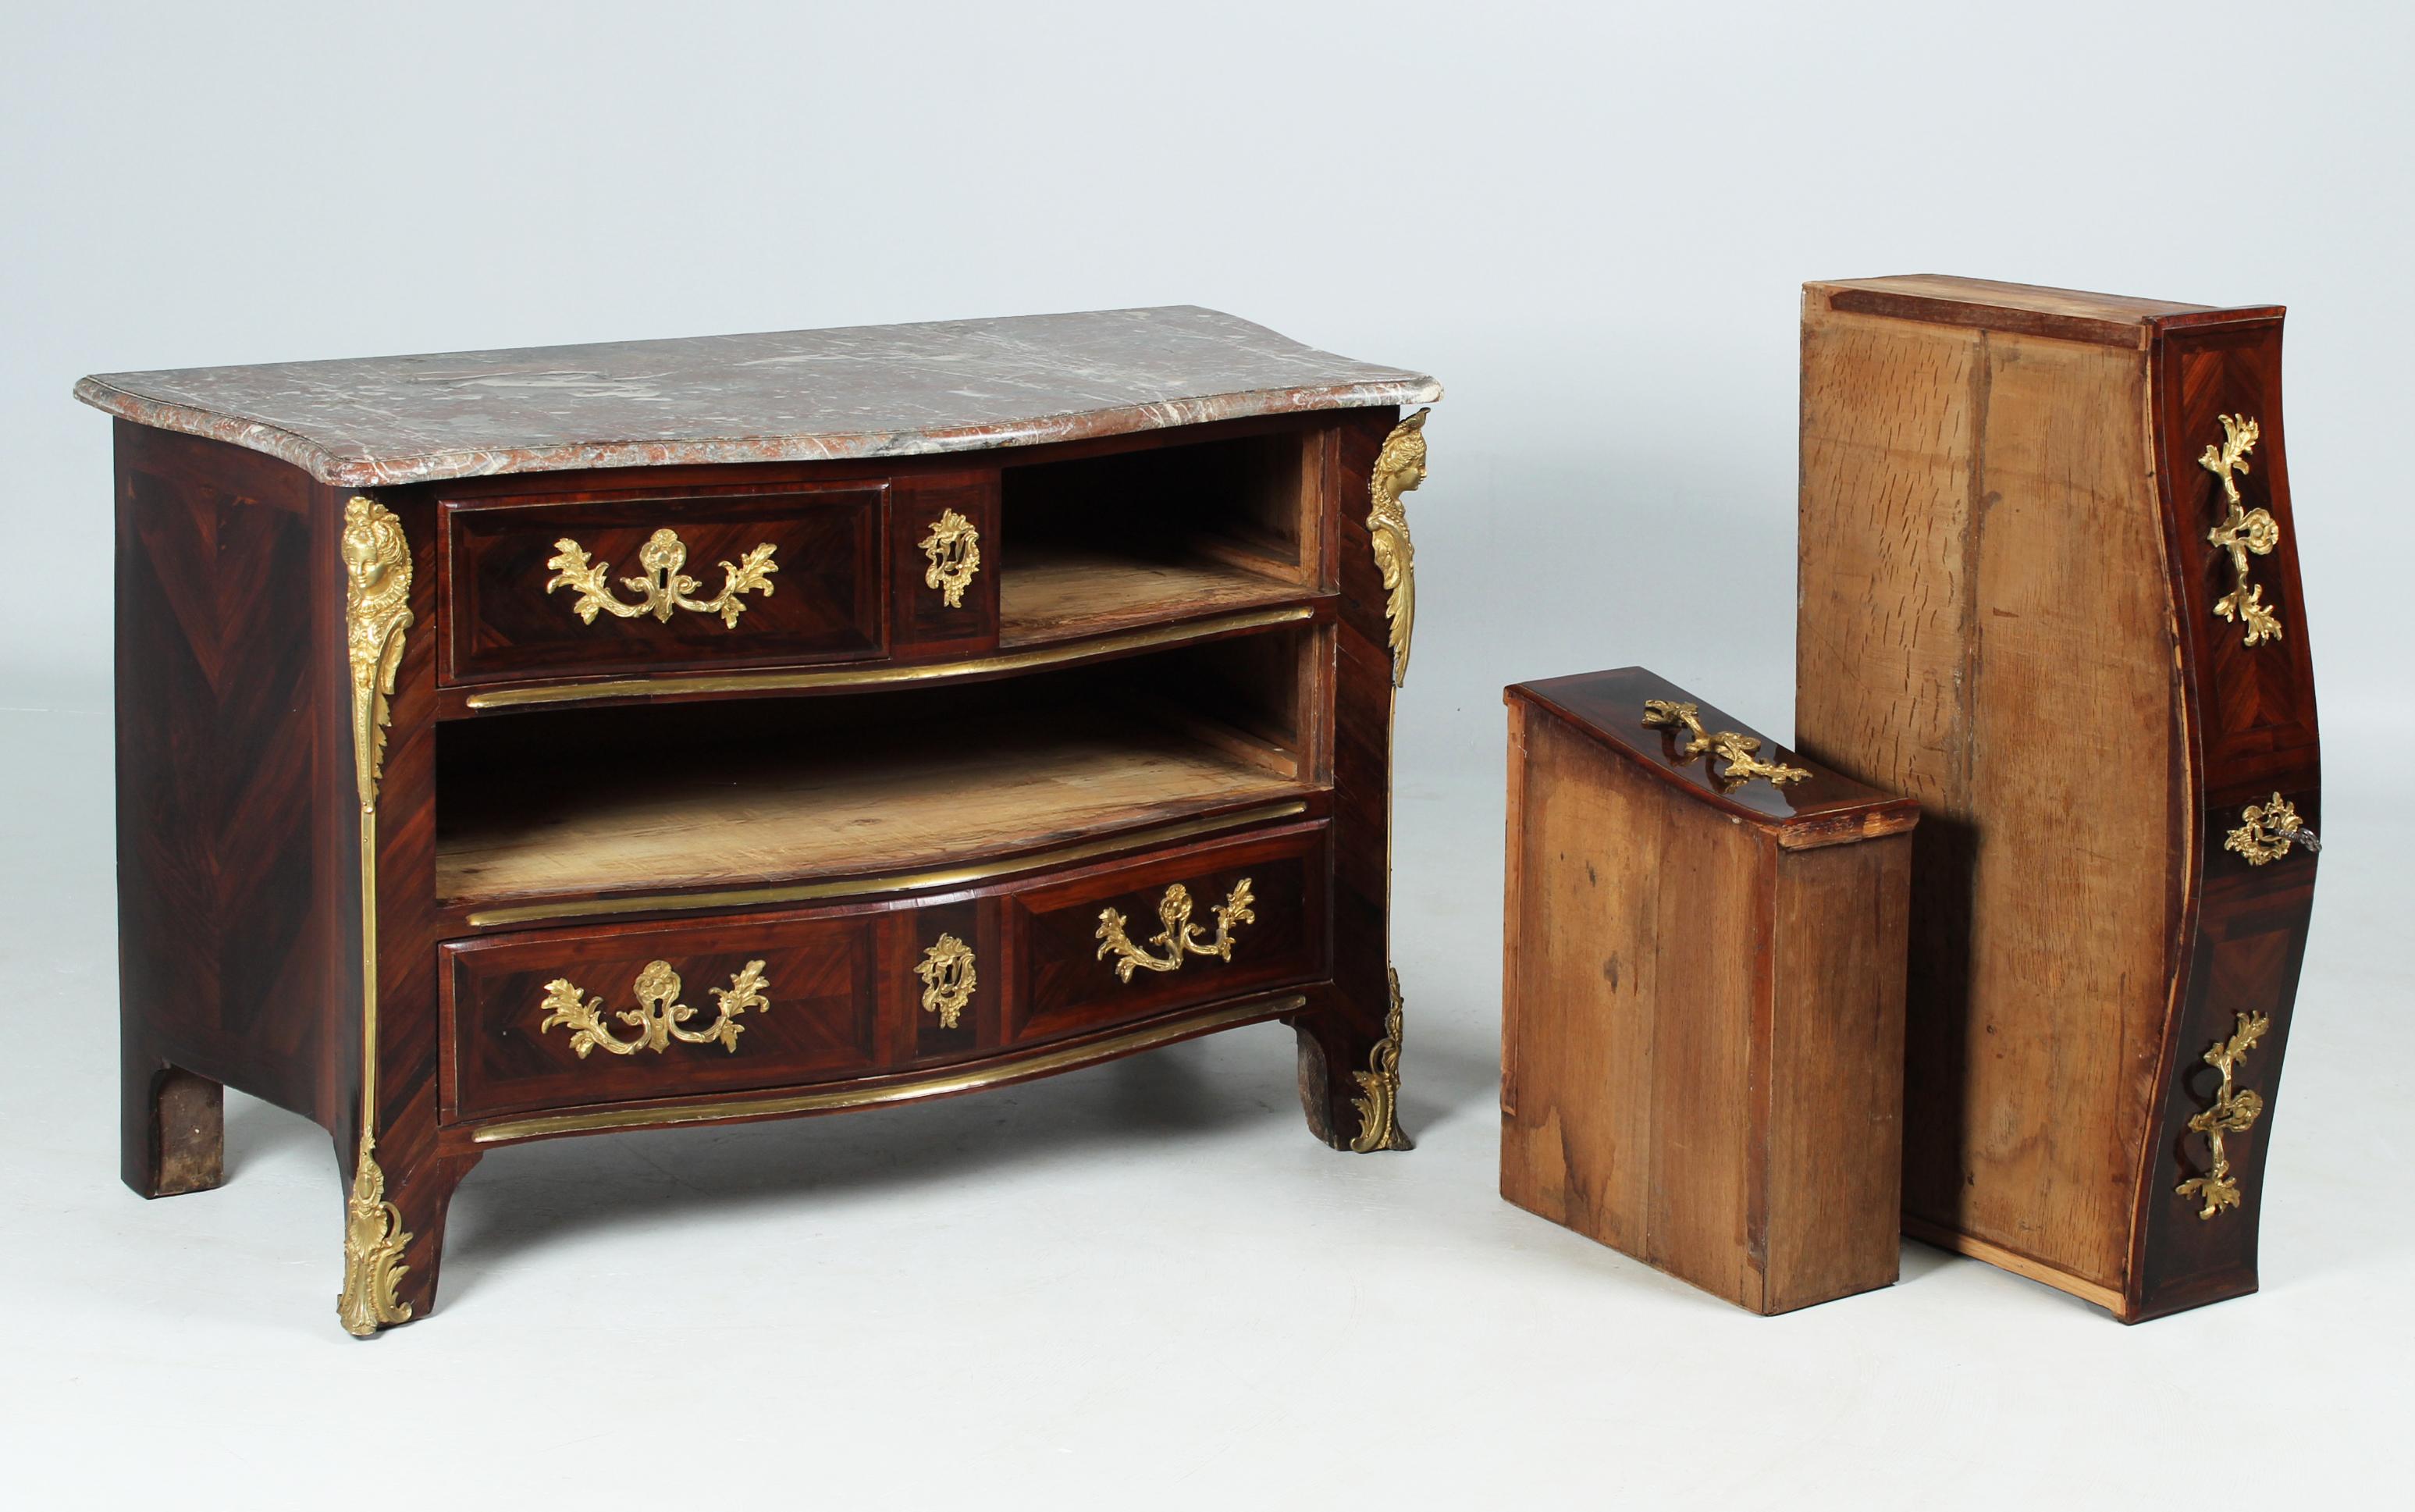 French Regence Chest of Drawers with Ormolu Fittings, Early 18th Century For Sale 2